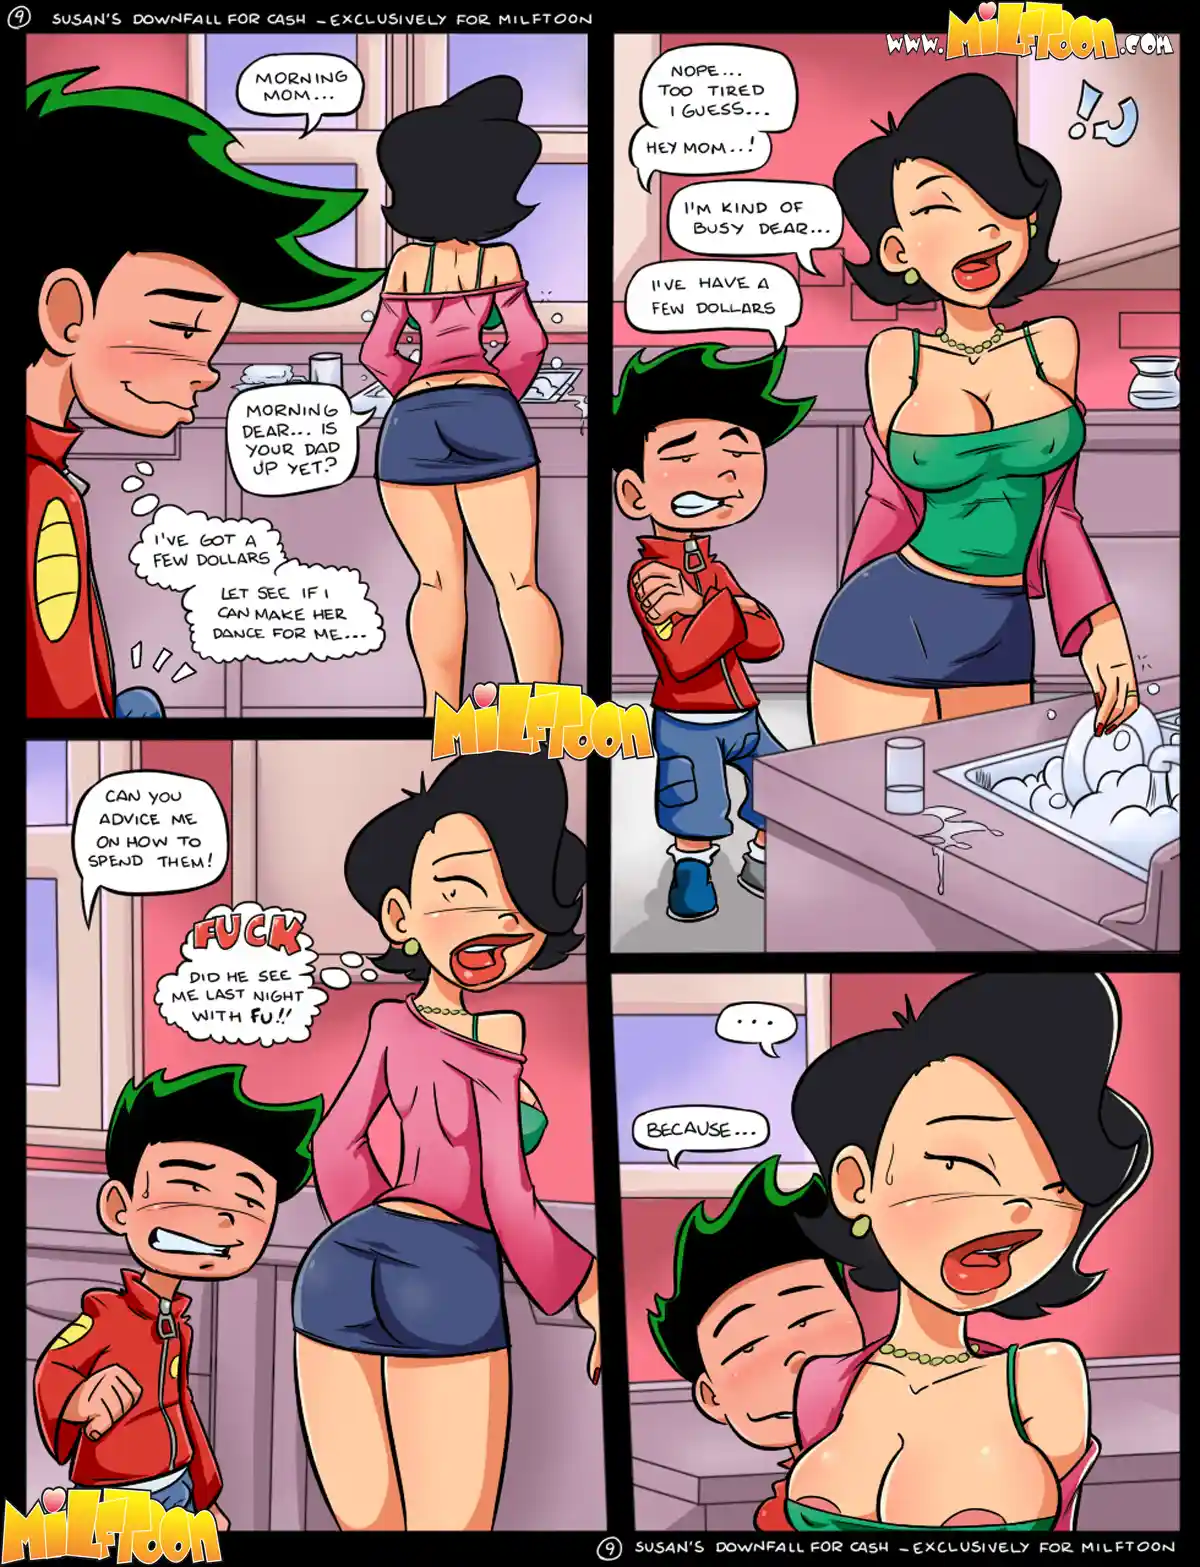 Susan's Downfall For Cash (American Dragon Jake Long) [MILFToon] - NovelCrow